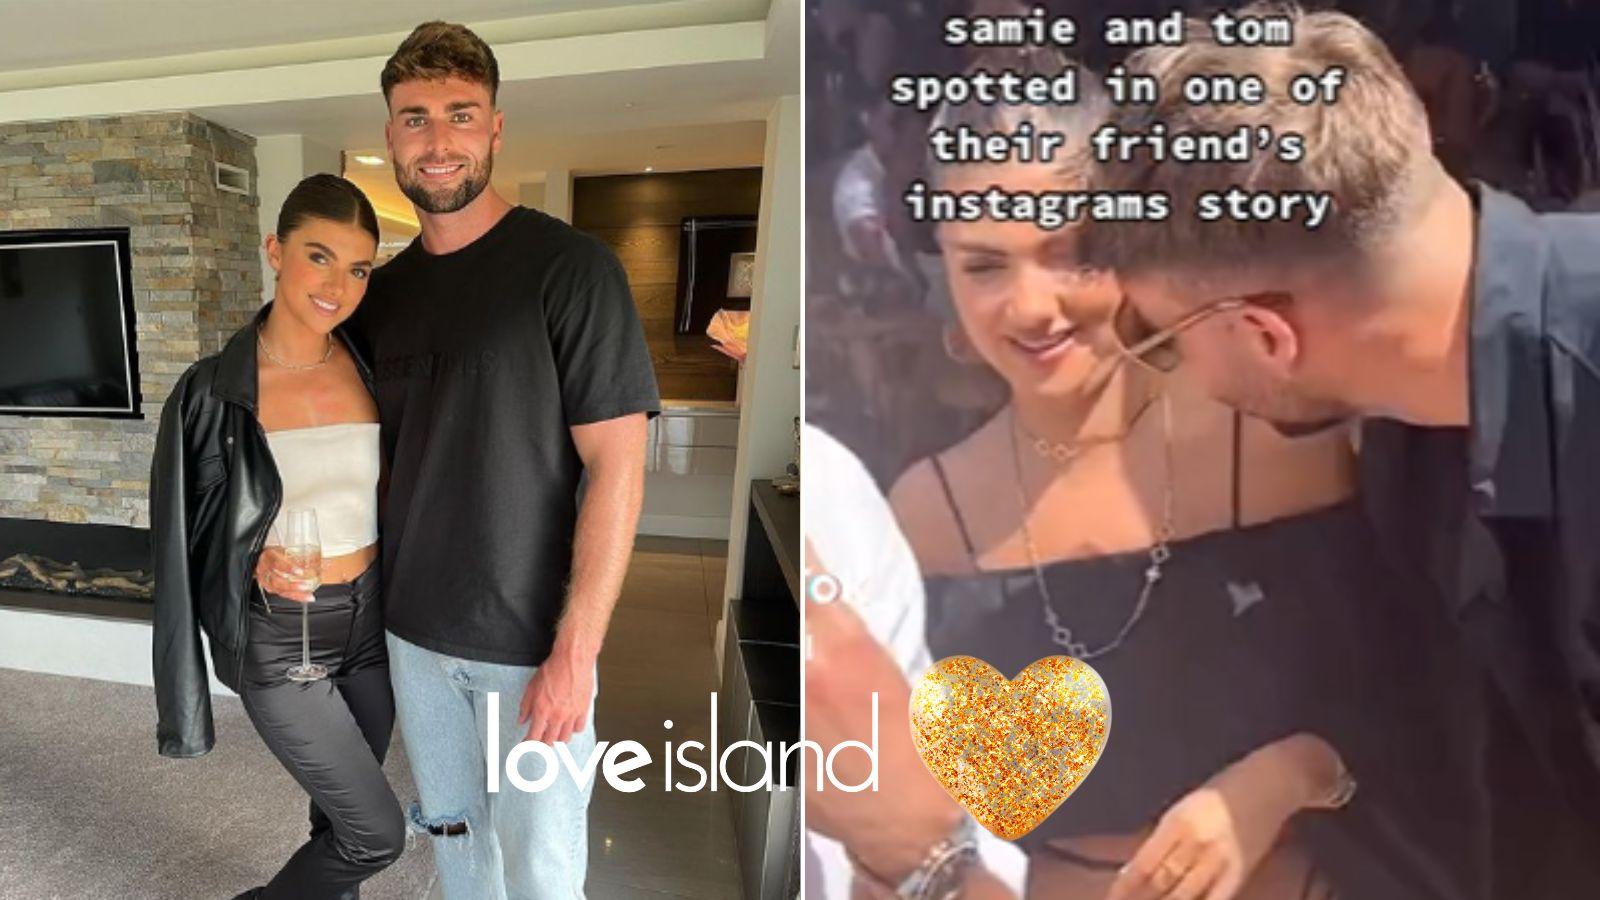 Tom and Samie from 'Love Island'